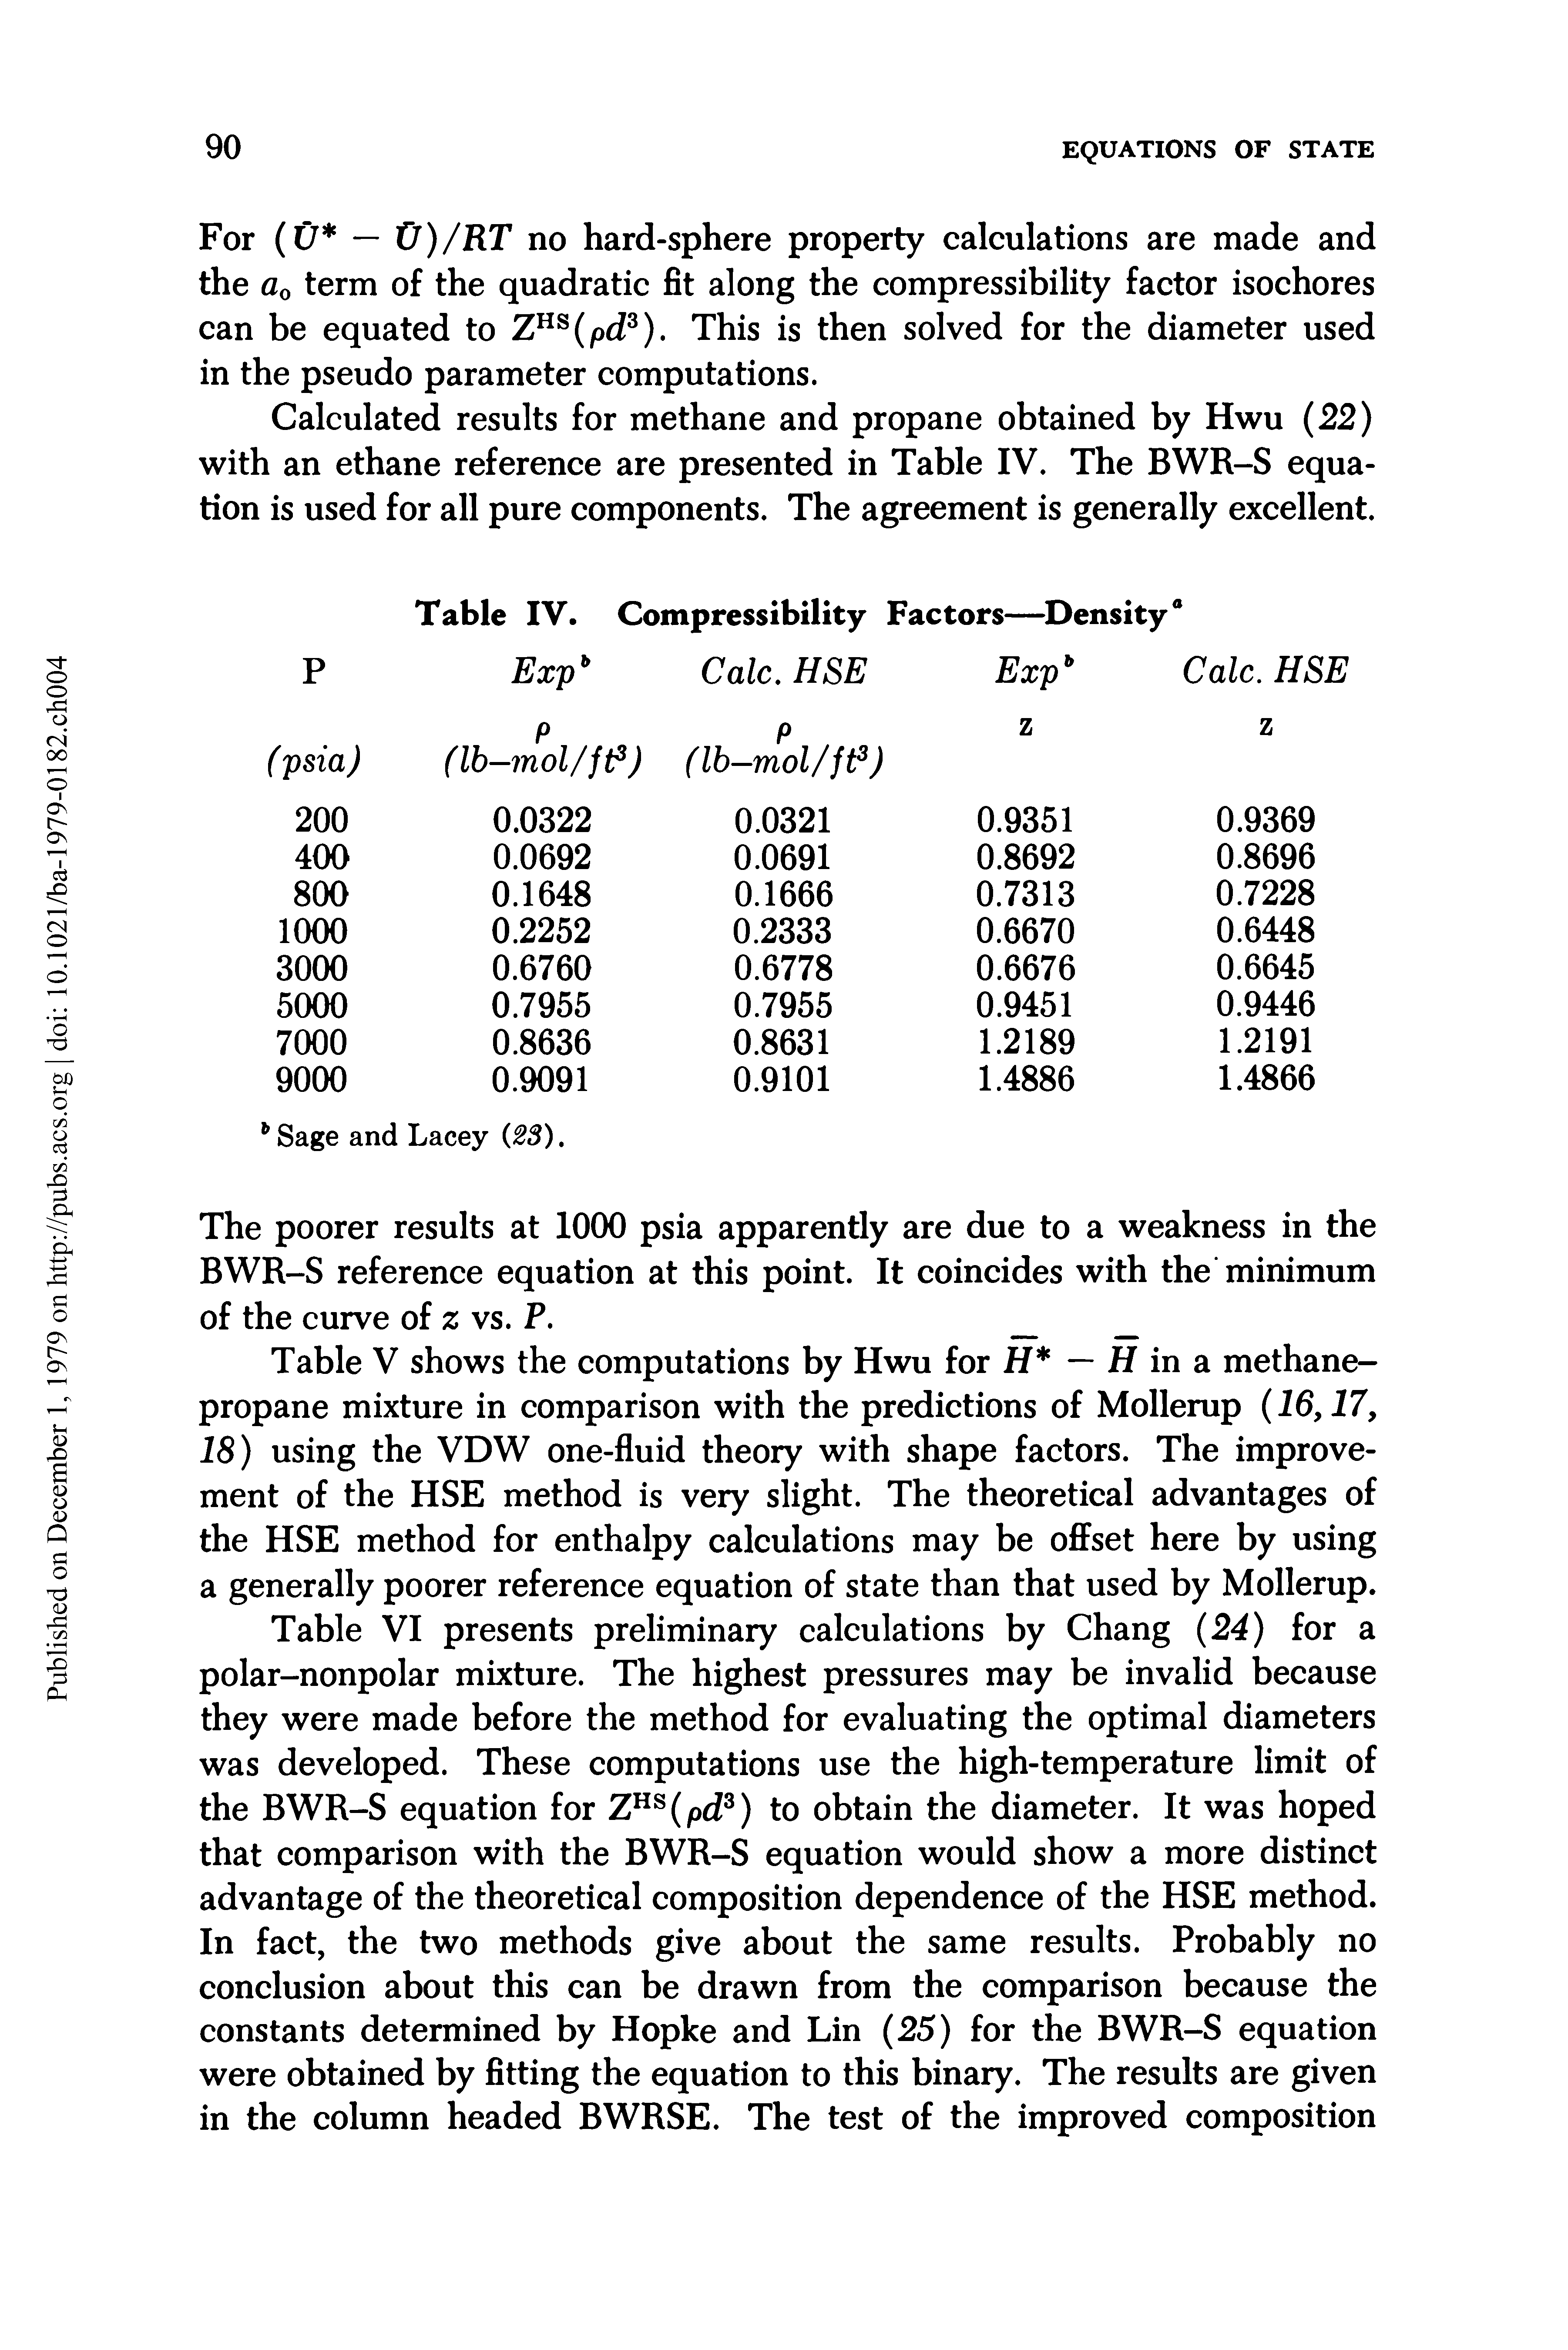 Table V shows the computations by Hwu for FT — H in a methane-propane mixture in comparison with the predictions of Mollerup (16,17, 18) using the VDW one-fluid theory with shape factors. The improvement of the HSE method is very slight. The theoretical advantages of the HSE method for enthalpy calculations may be offset here by using a generally poorer reference equation of state than that used by Mollerup.